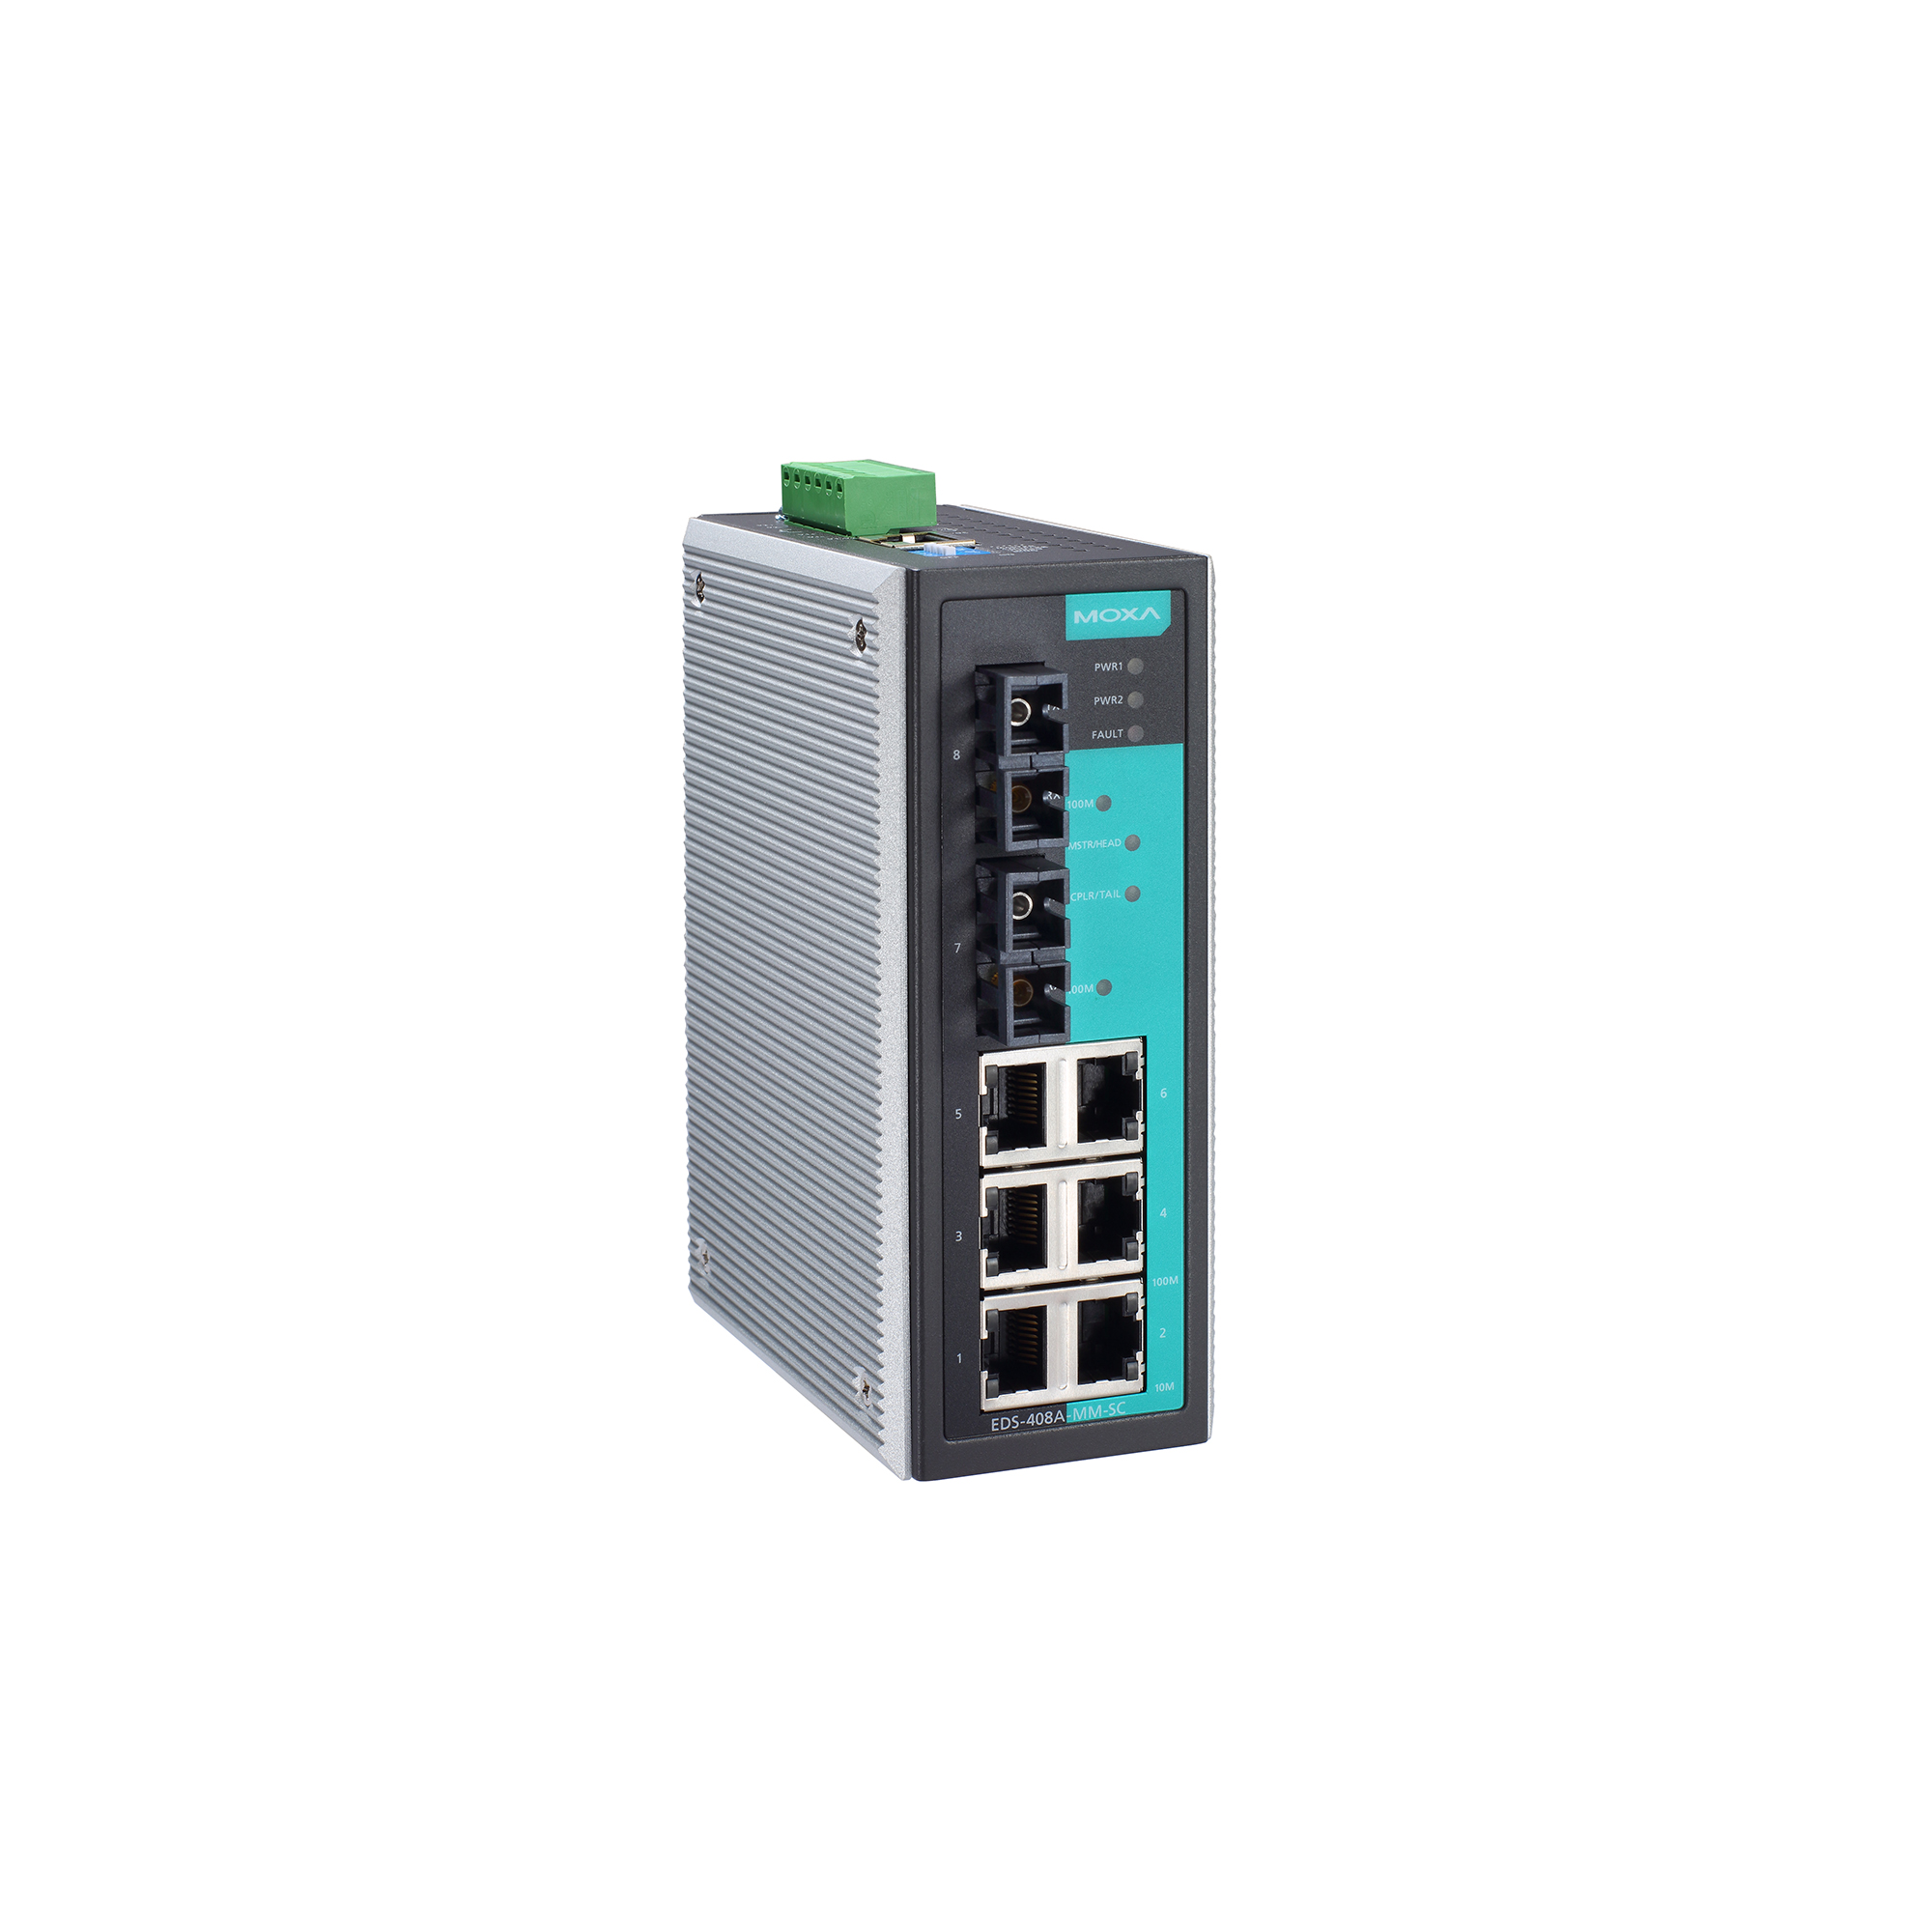 Eds 408a Series Layer 2 Managed Switches Moxa